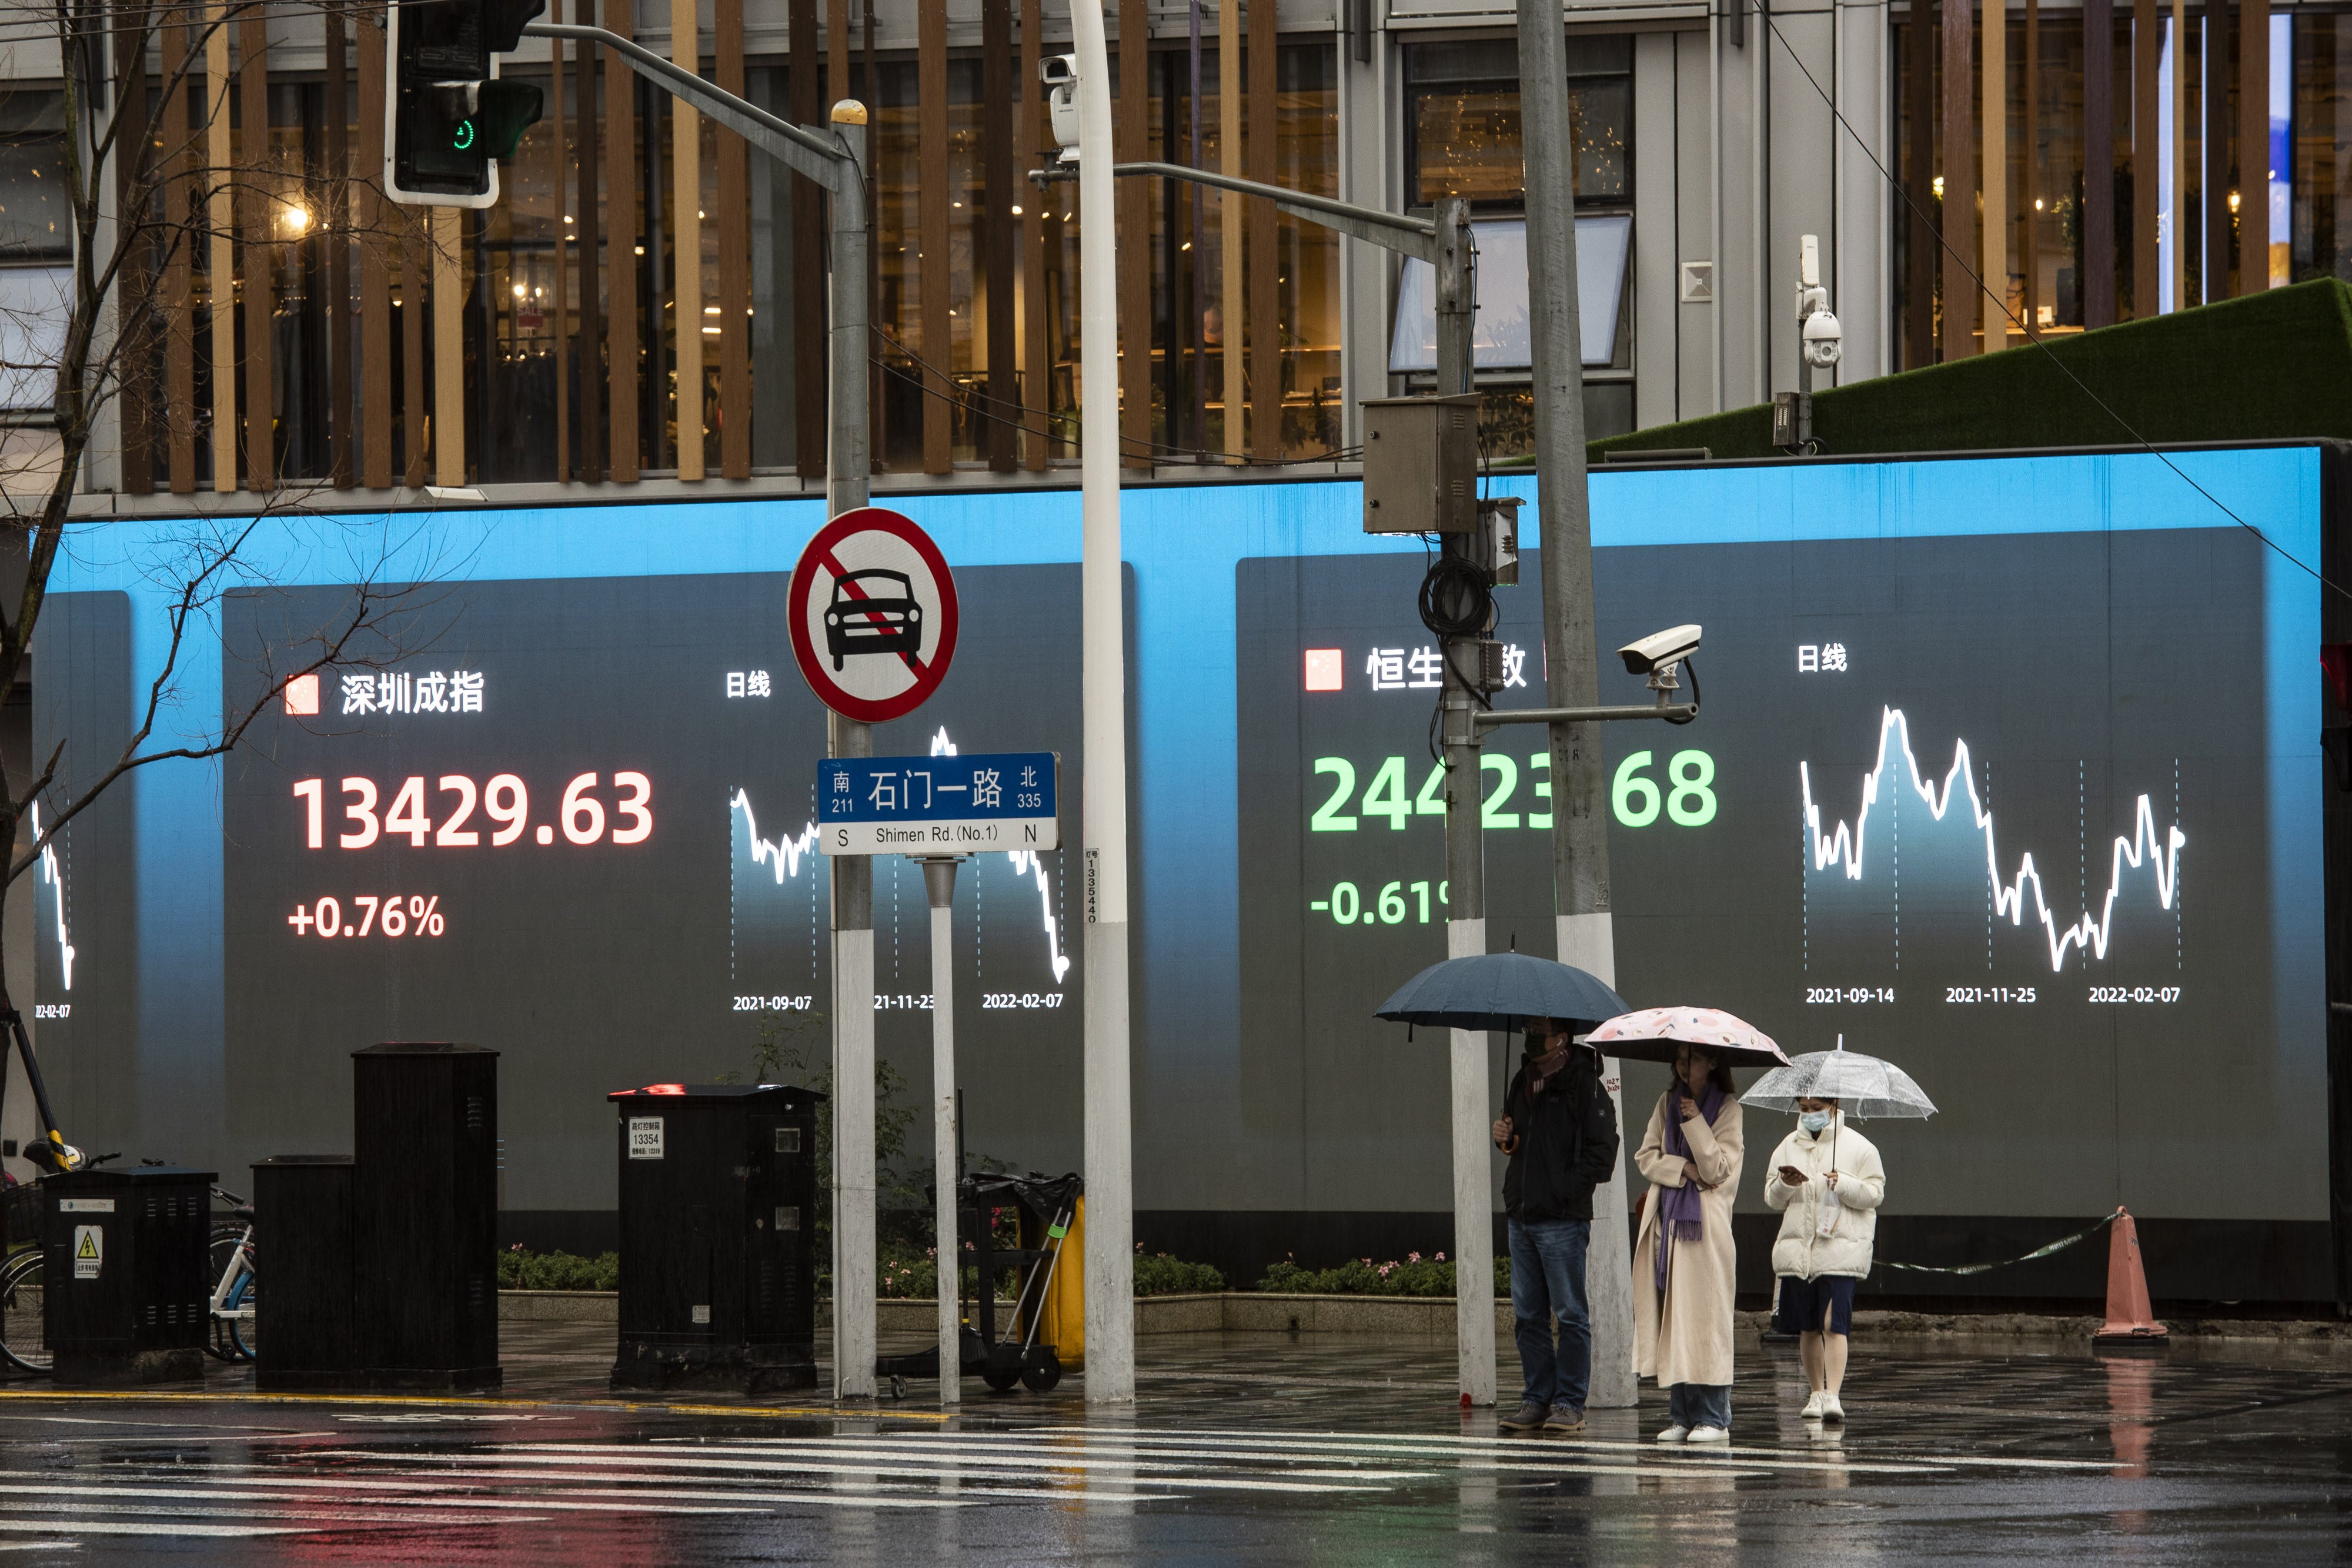 Pedestrians wait to cross a road in front of a public screen displaying stock data in Shanghai in February 2022. Photo: Bloomberg